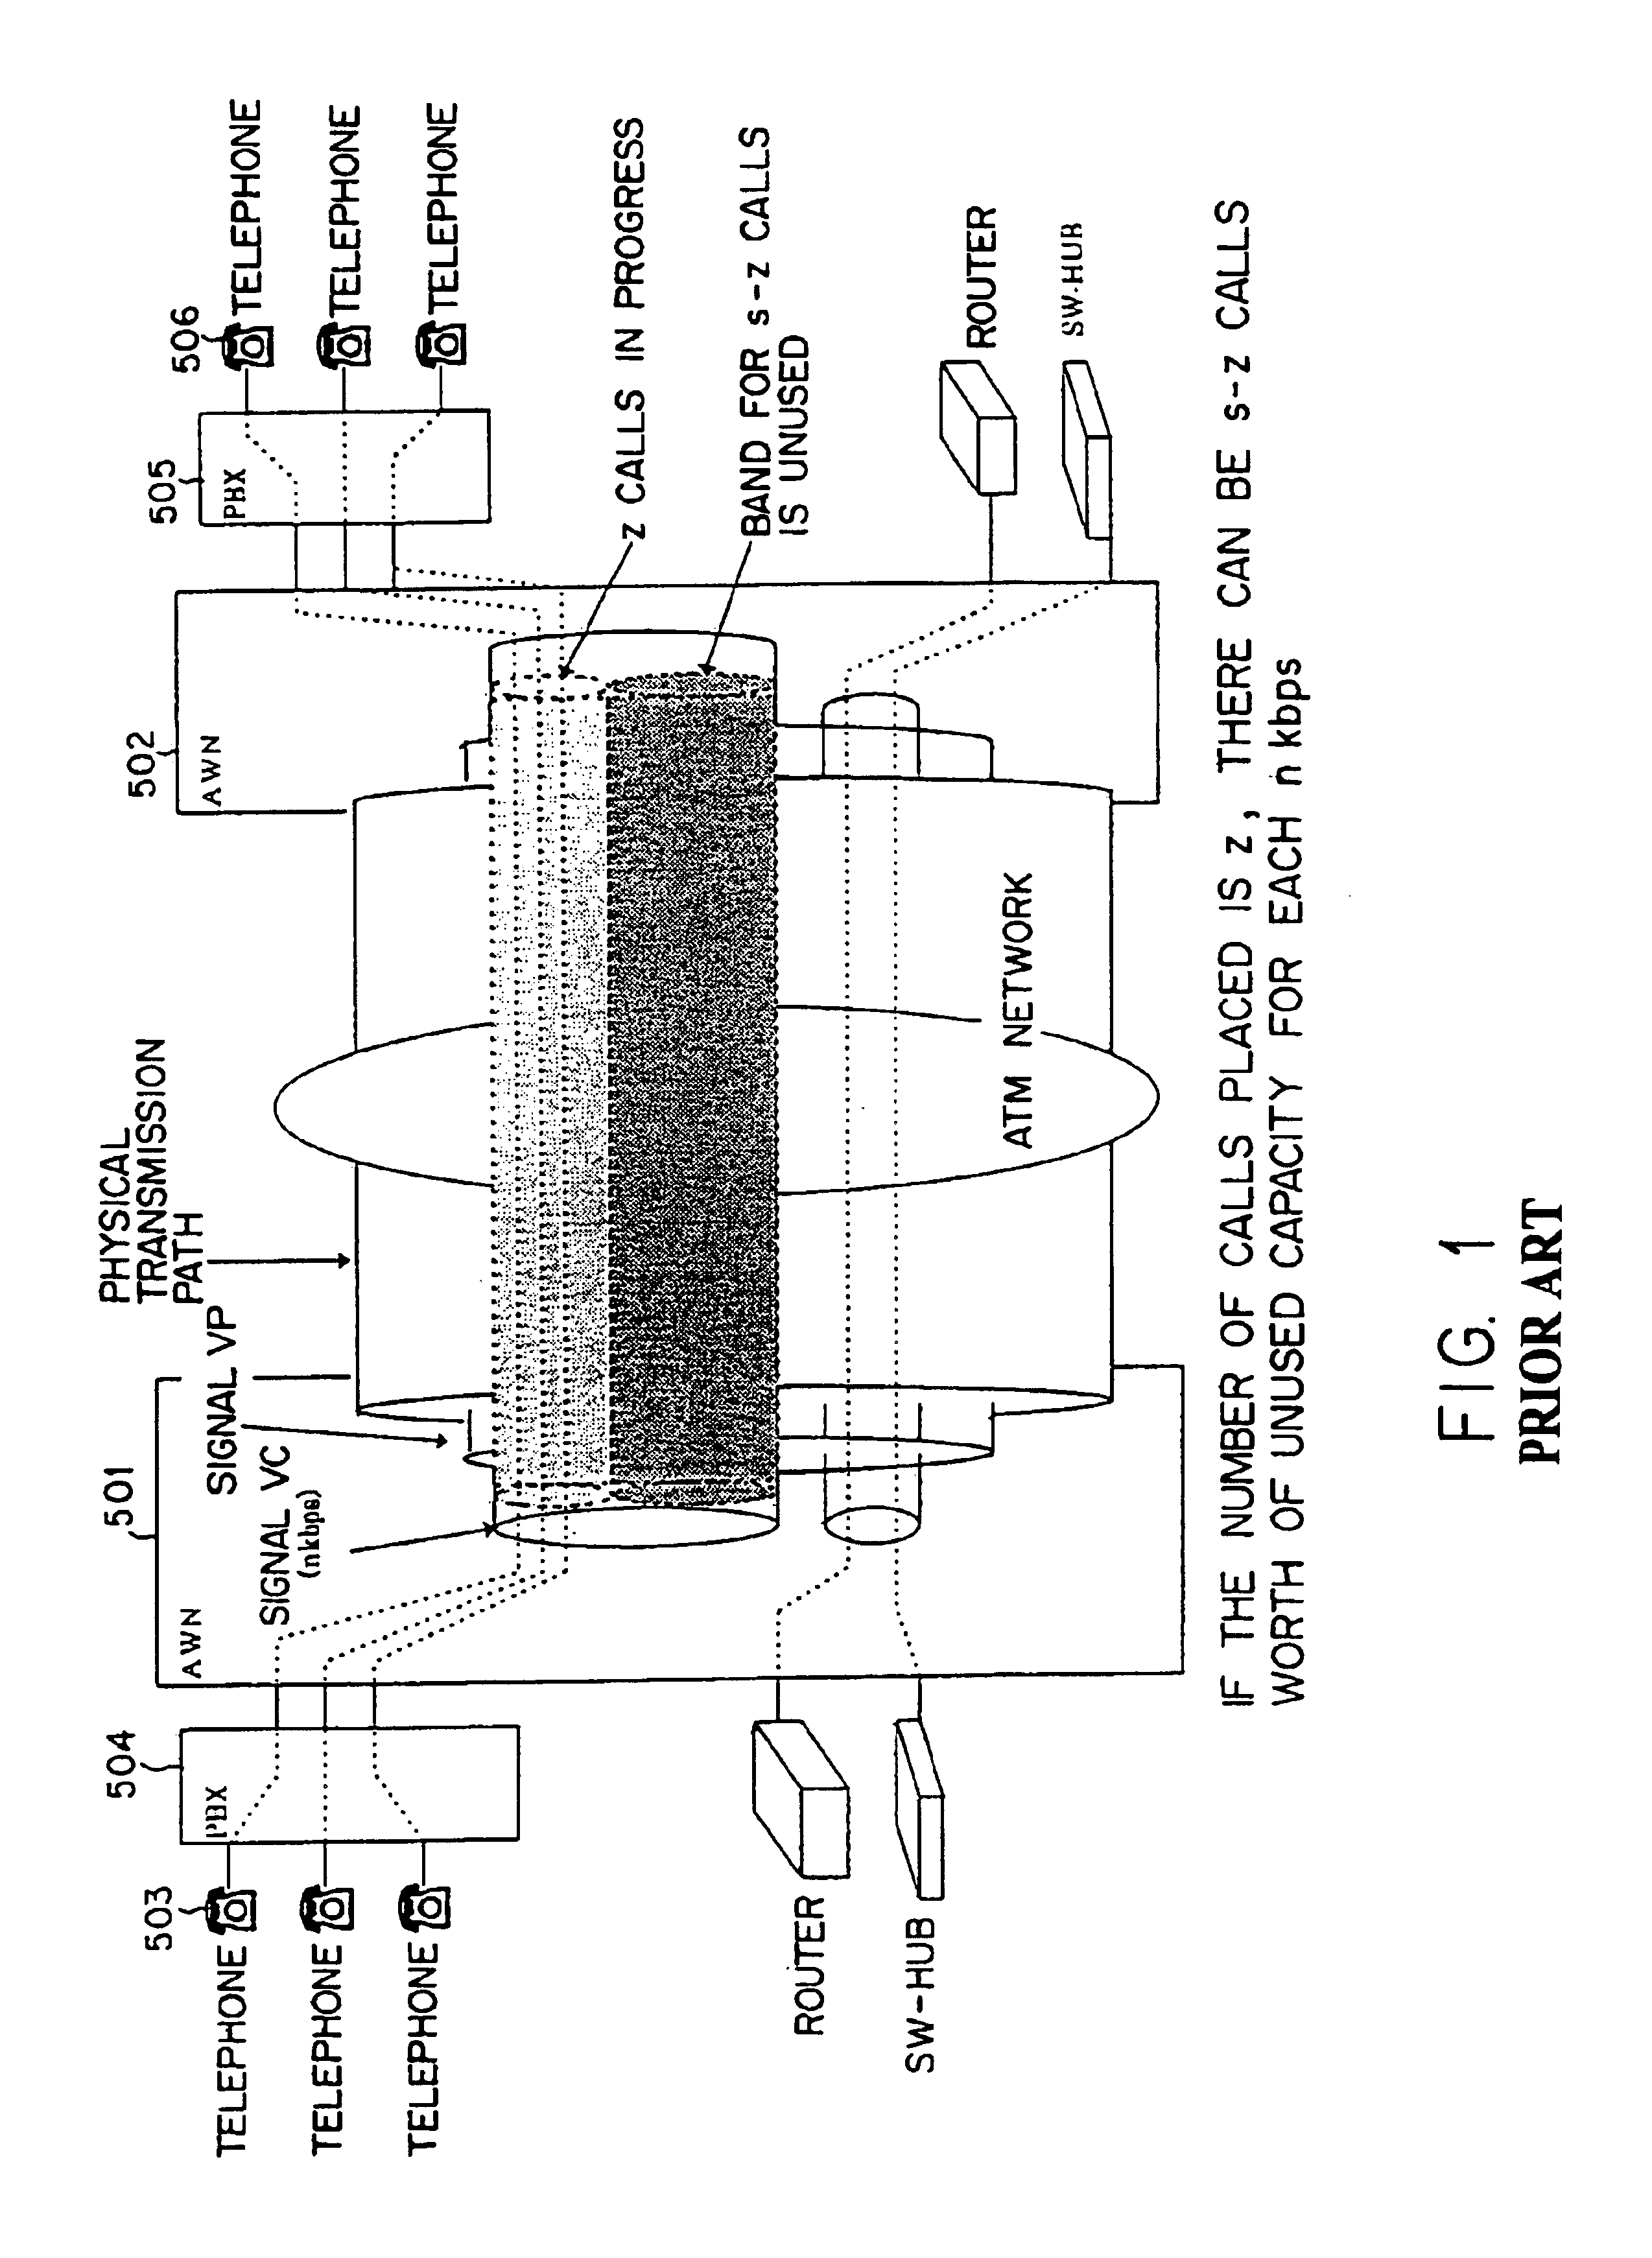 Device for controlling signal bands in a packet network